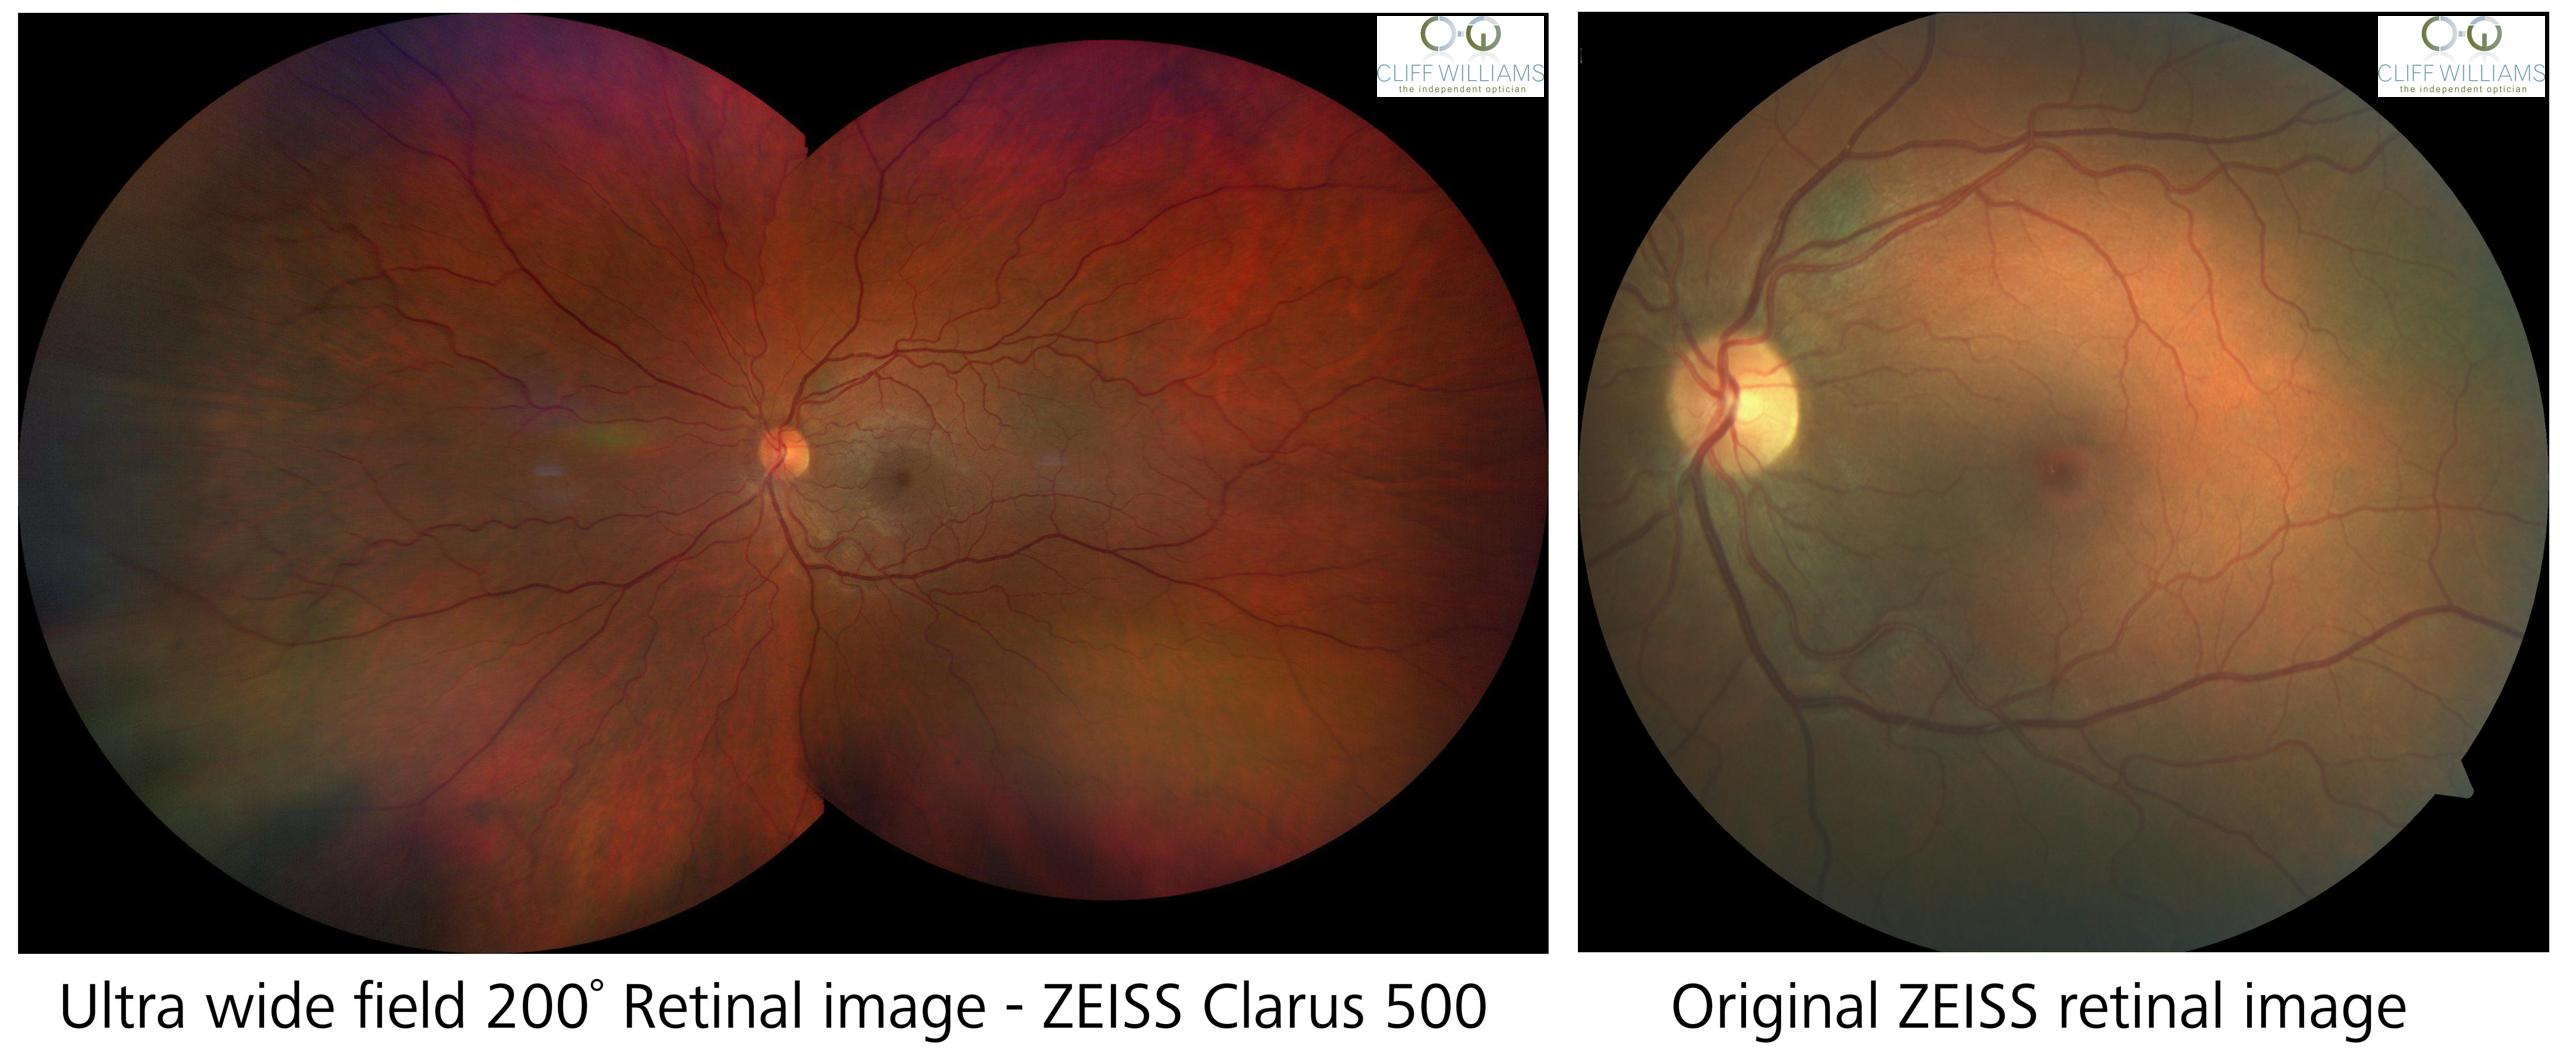 ultra wide field retinal picture using ZEISS Clarus 500 camera